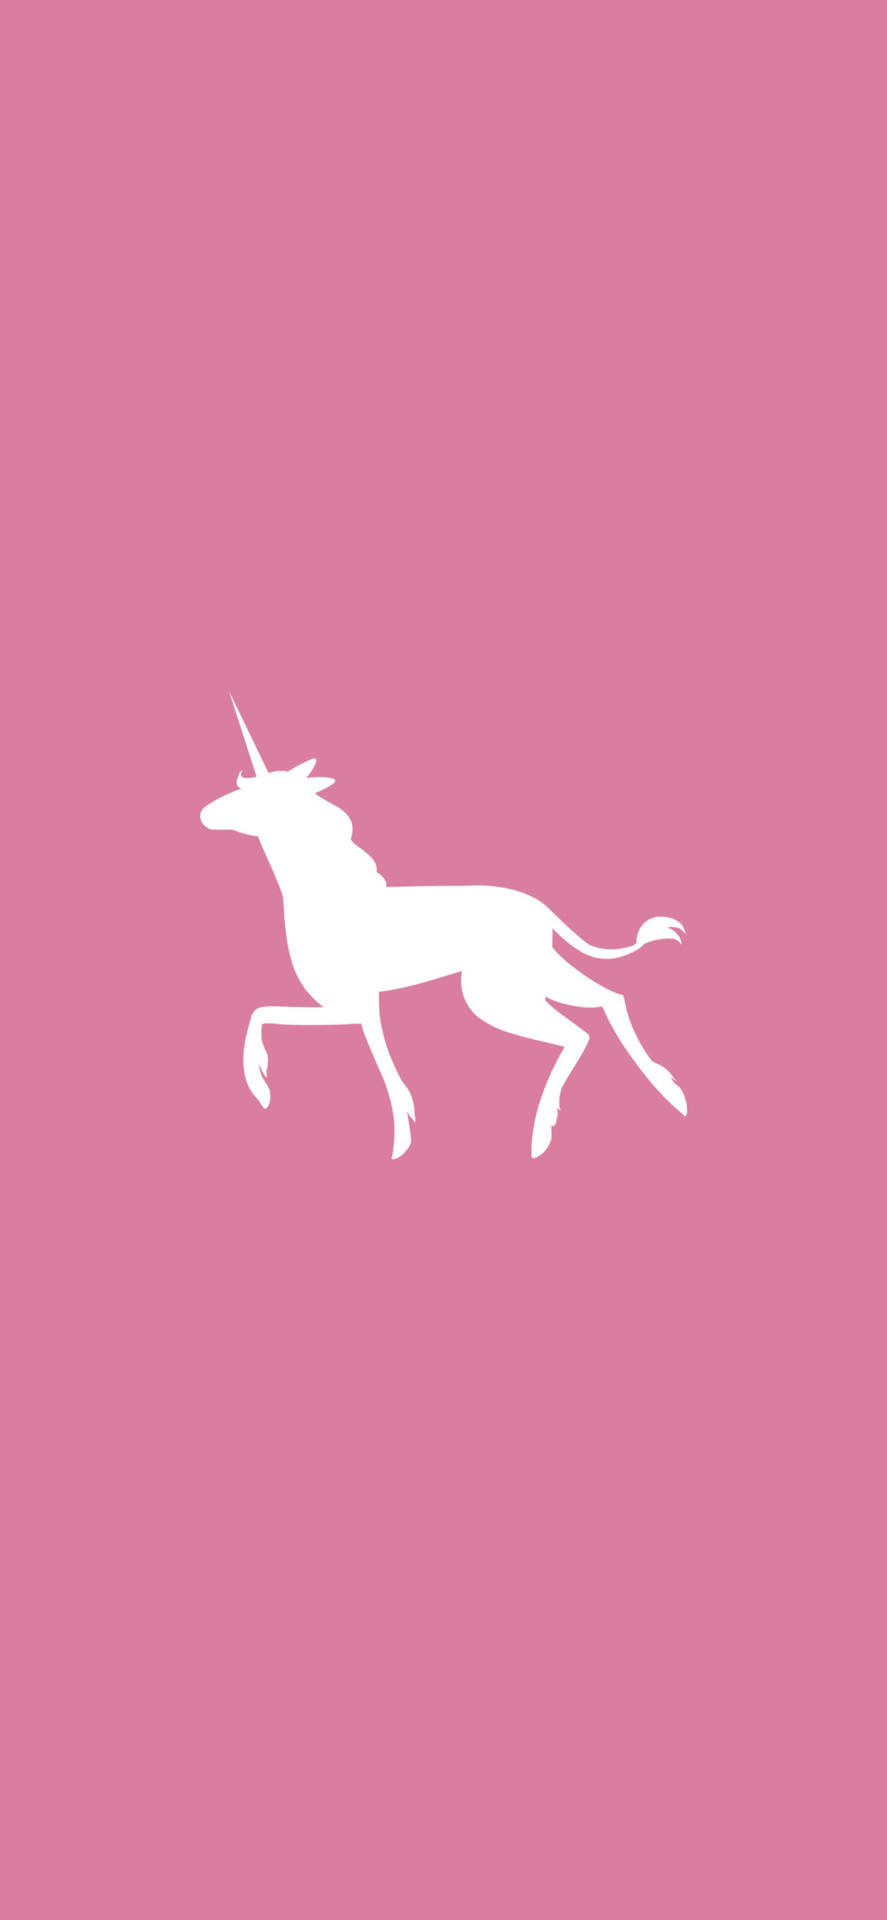 Explore the world with this Cool Unicorn Wallpaper